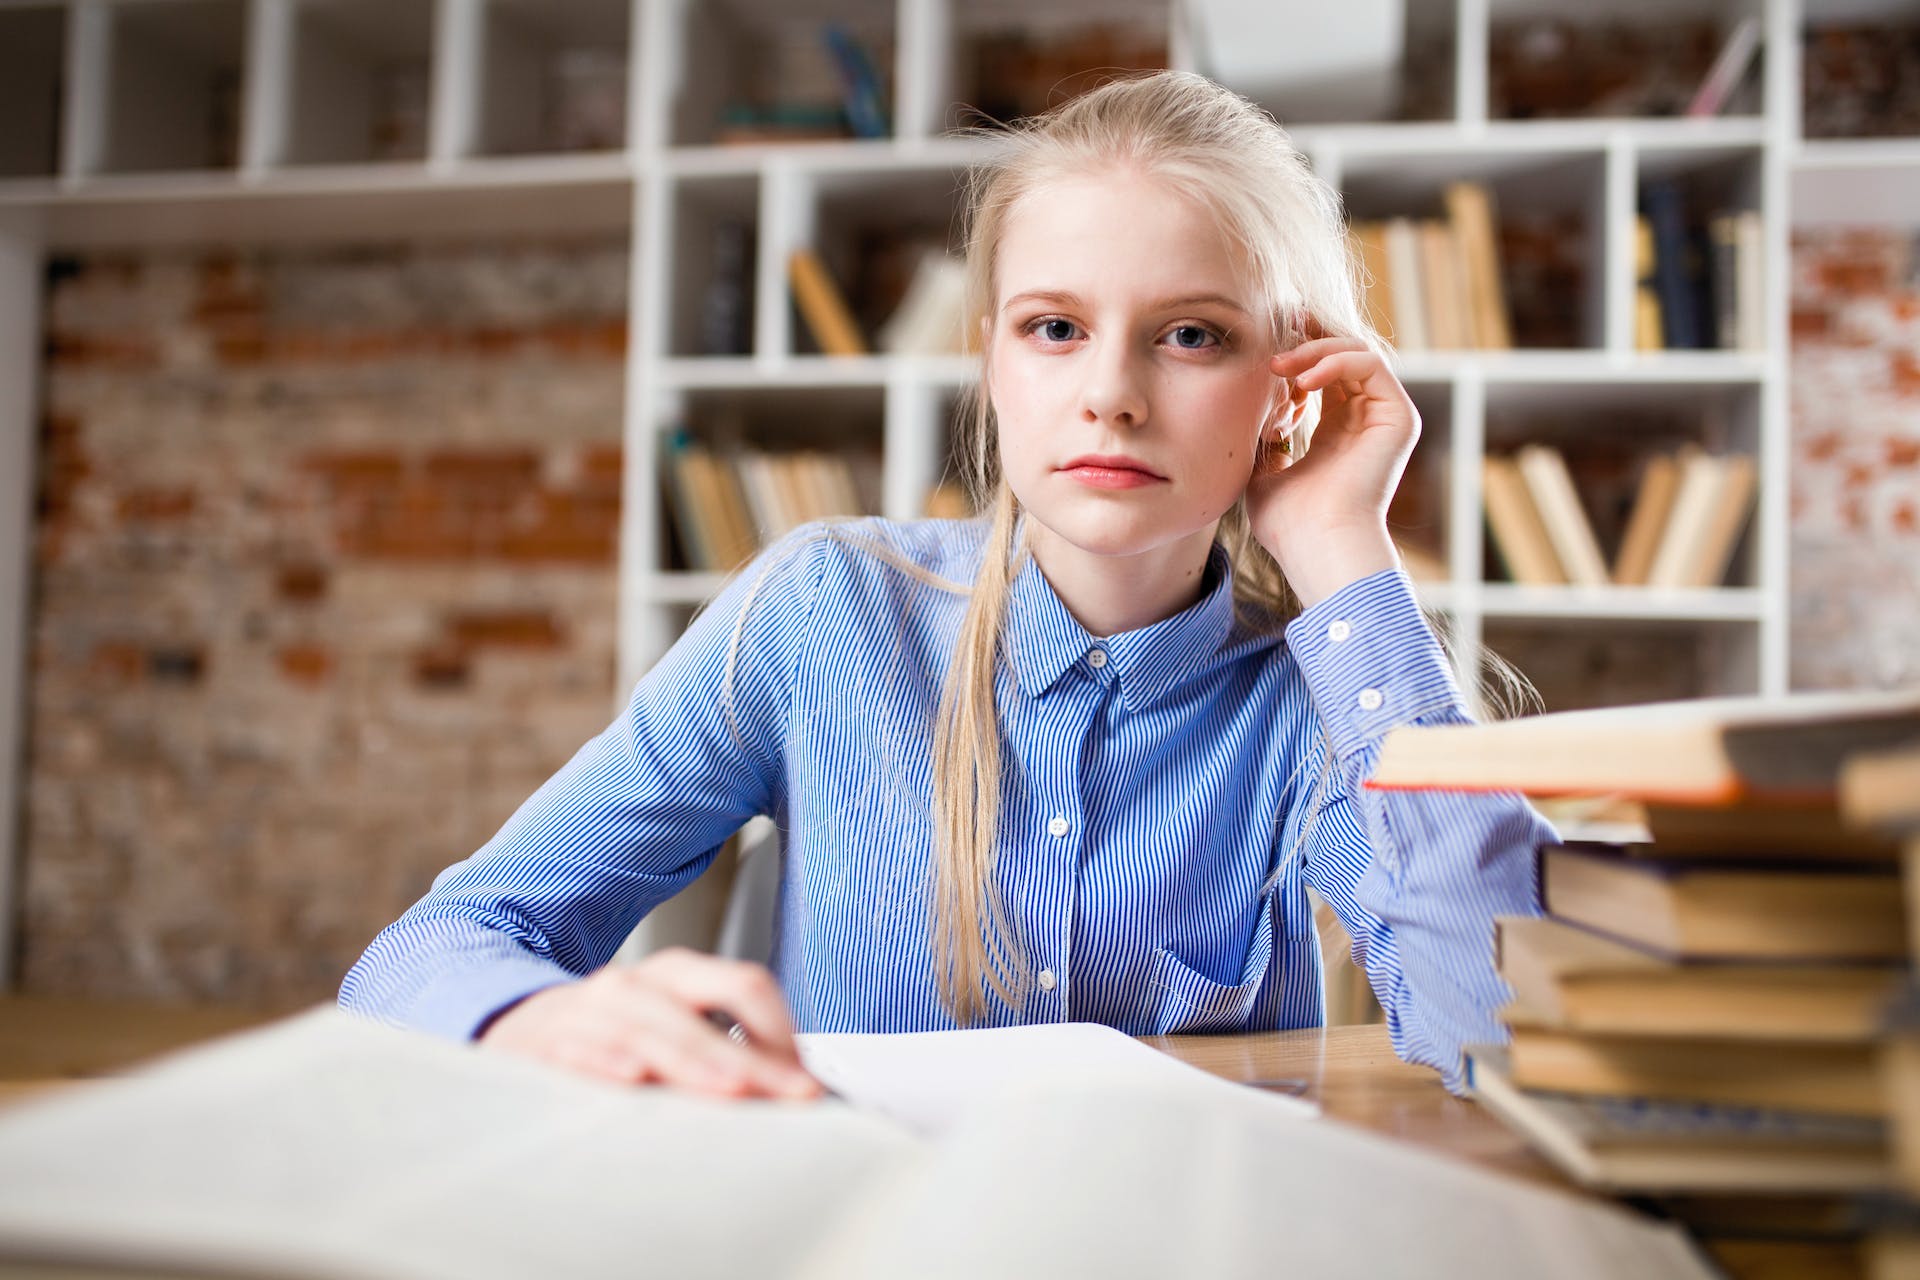 A young girl studying | Source: Pexels